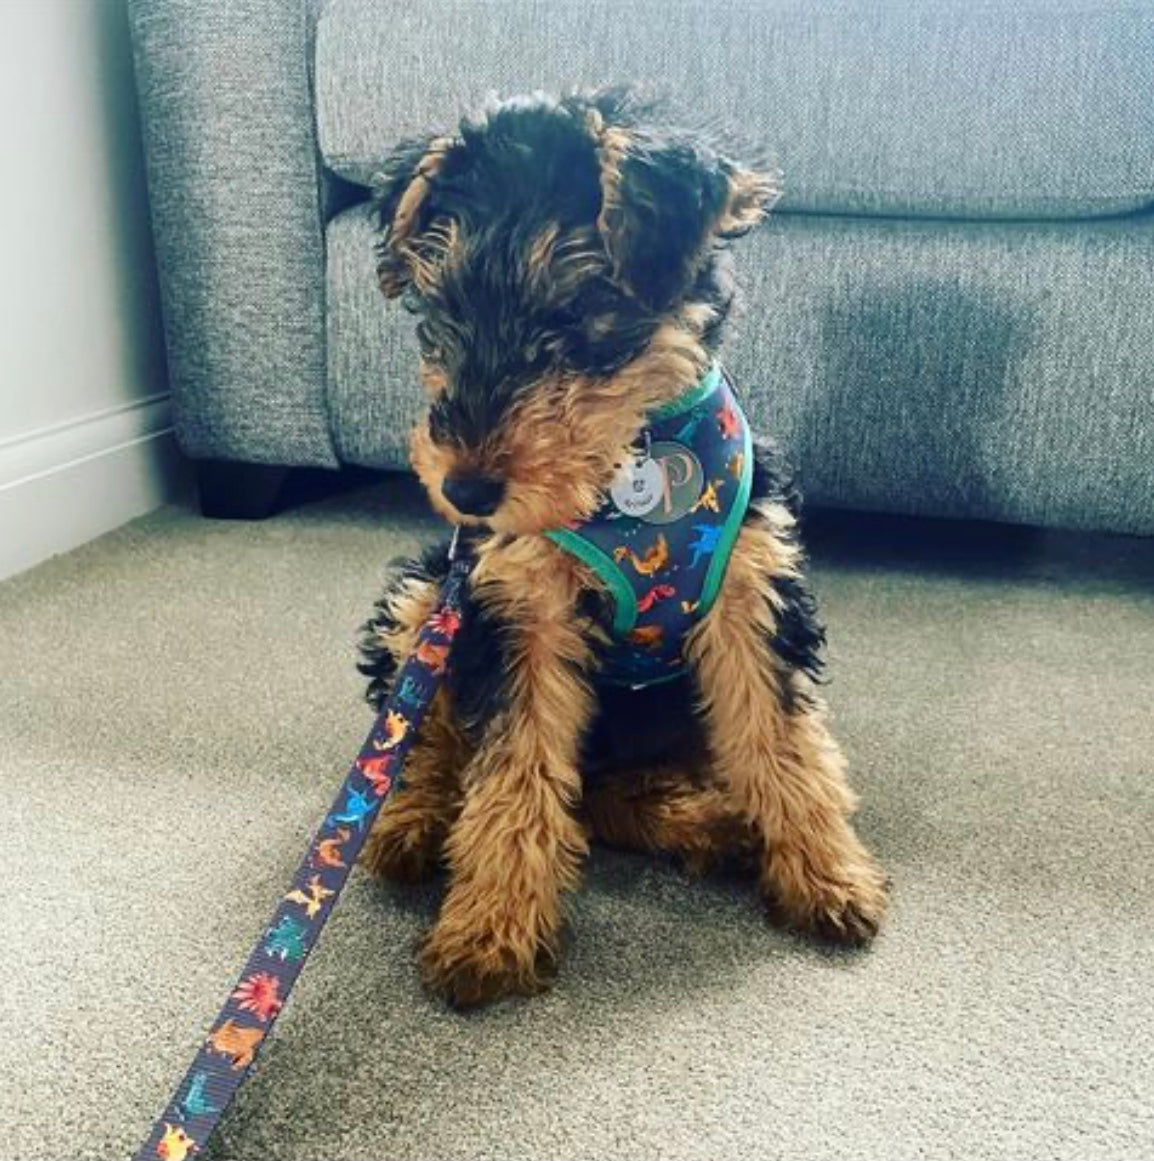 Welsh Terrier puppy Arthur wearing Rex dog harness and lead